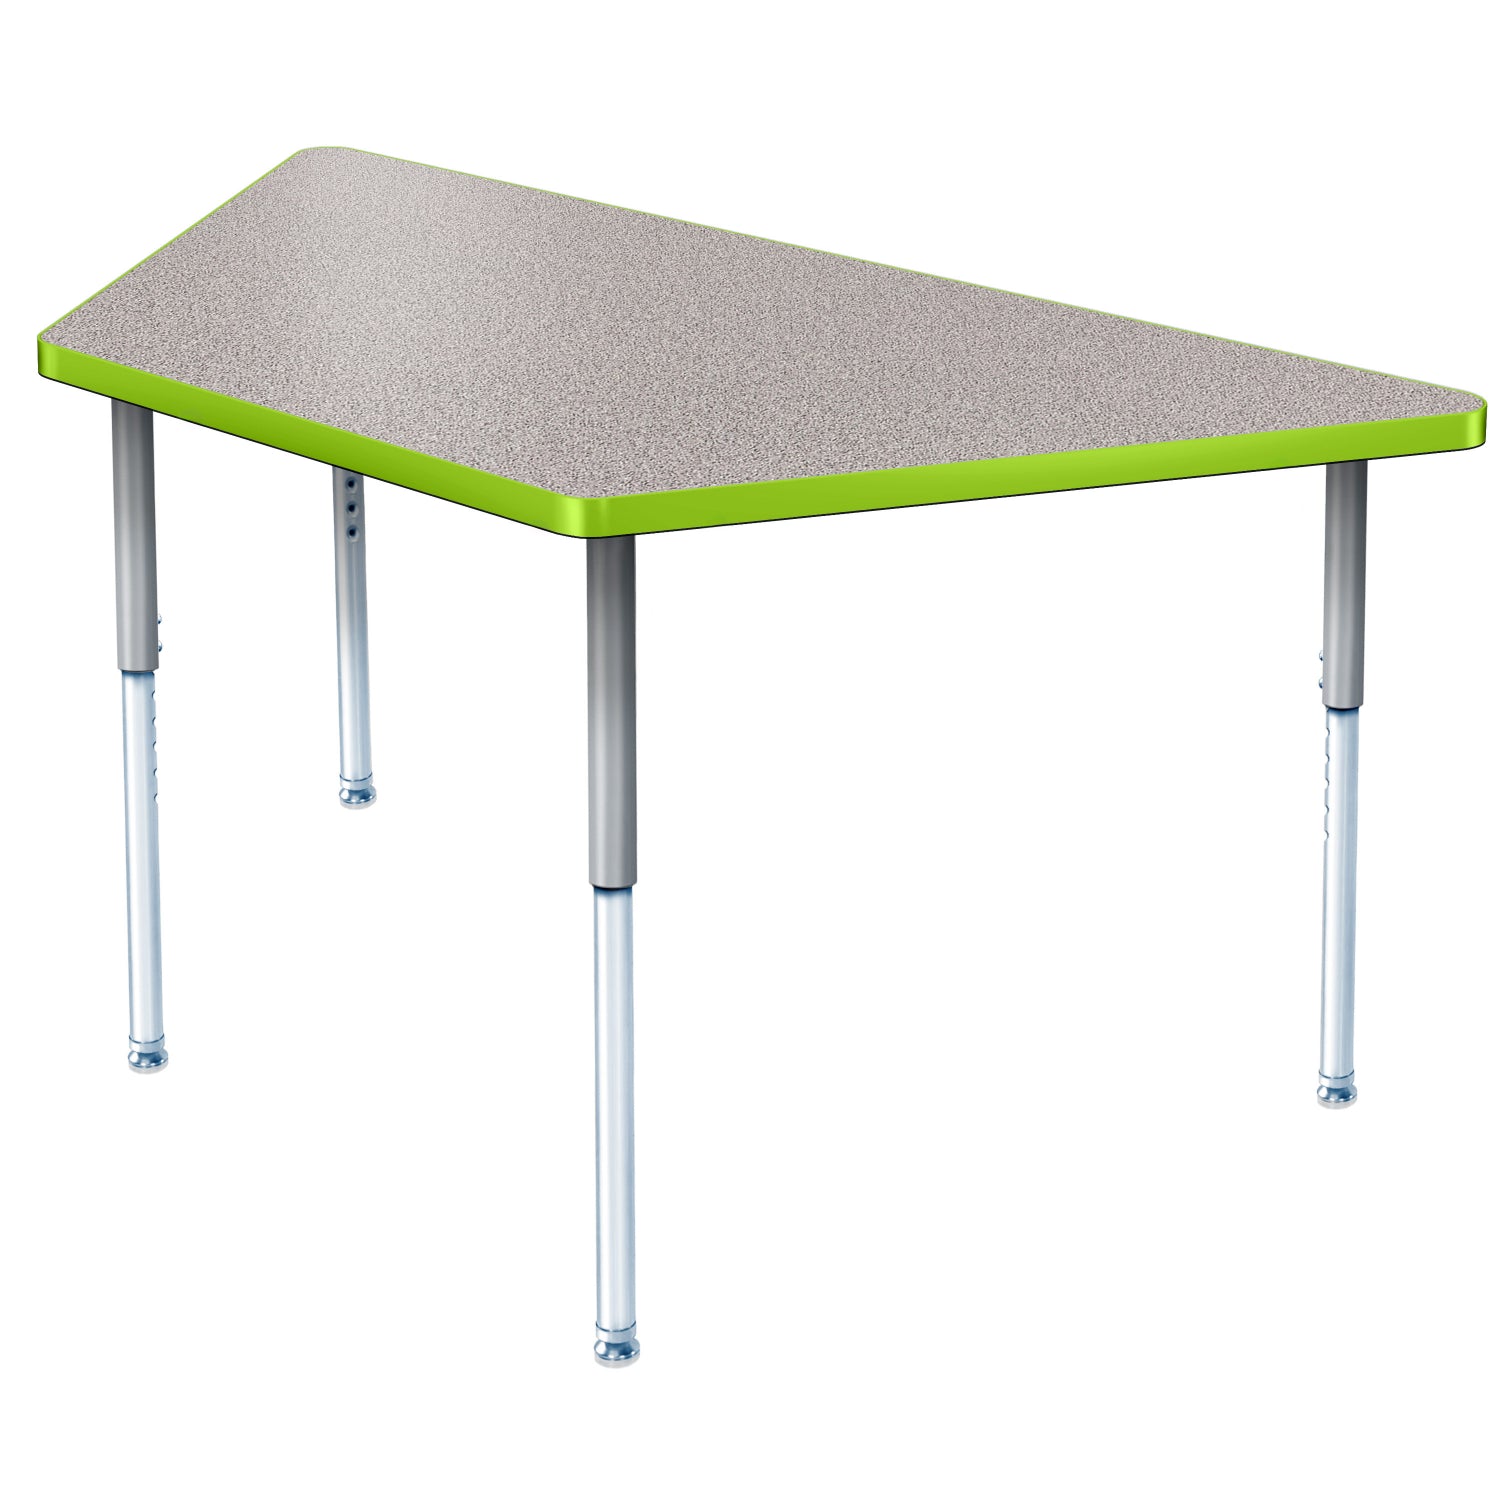 Modern Classic Series 30 x 30 x 60" Trapezoid Activity Table with High Pressure Laminate Top, Adjustable Height Legs